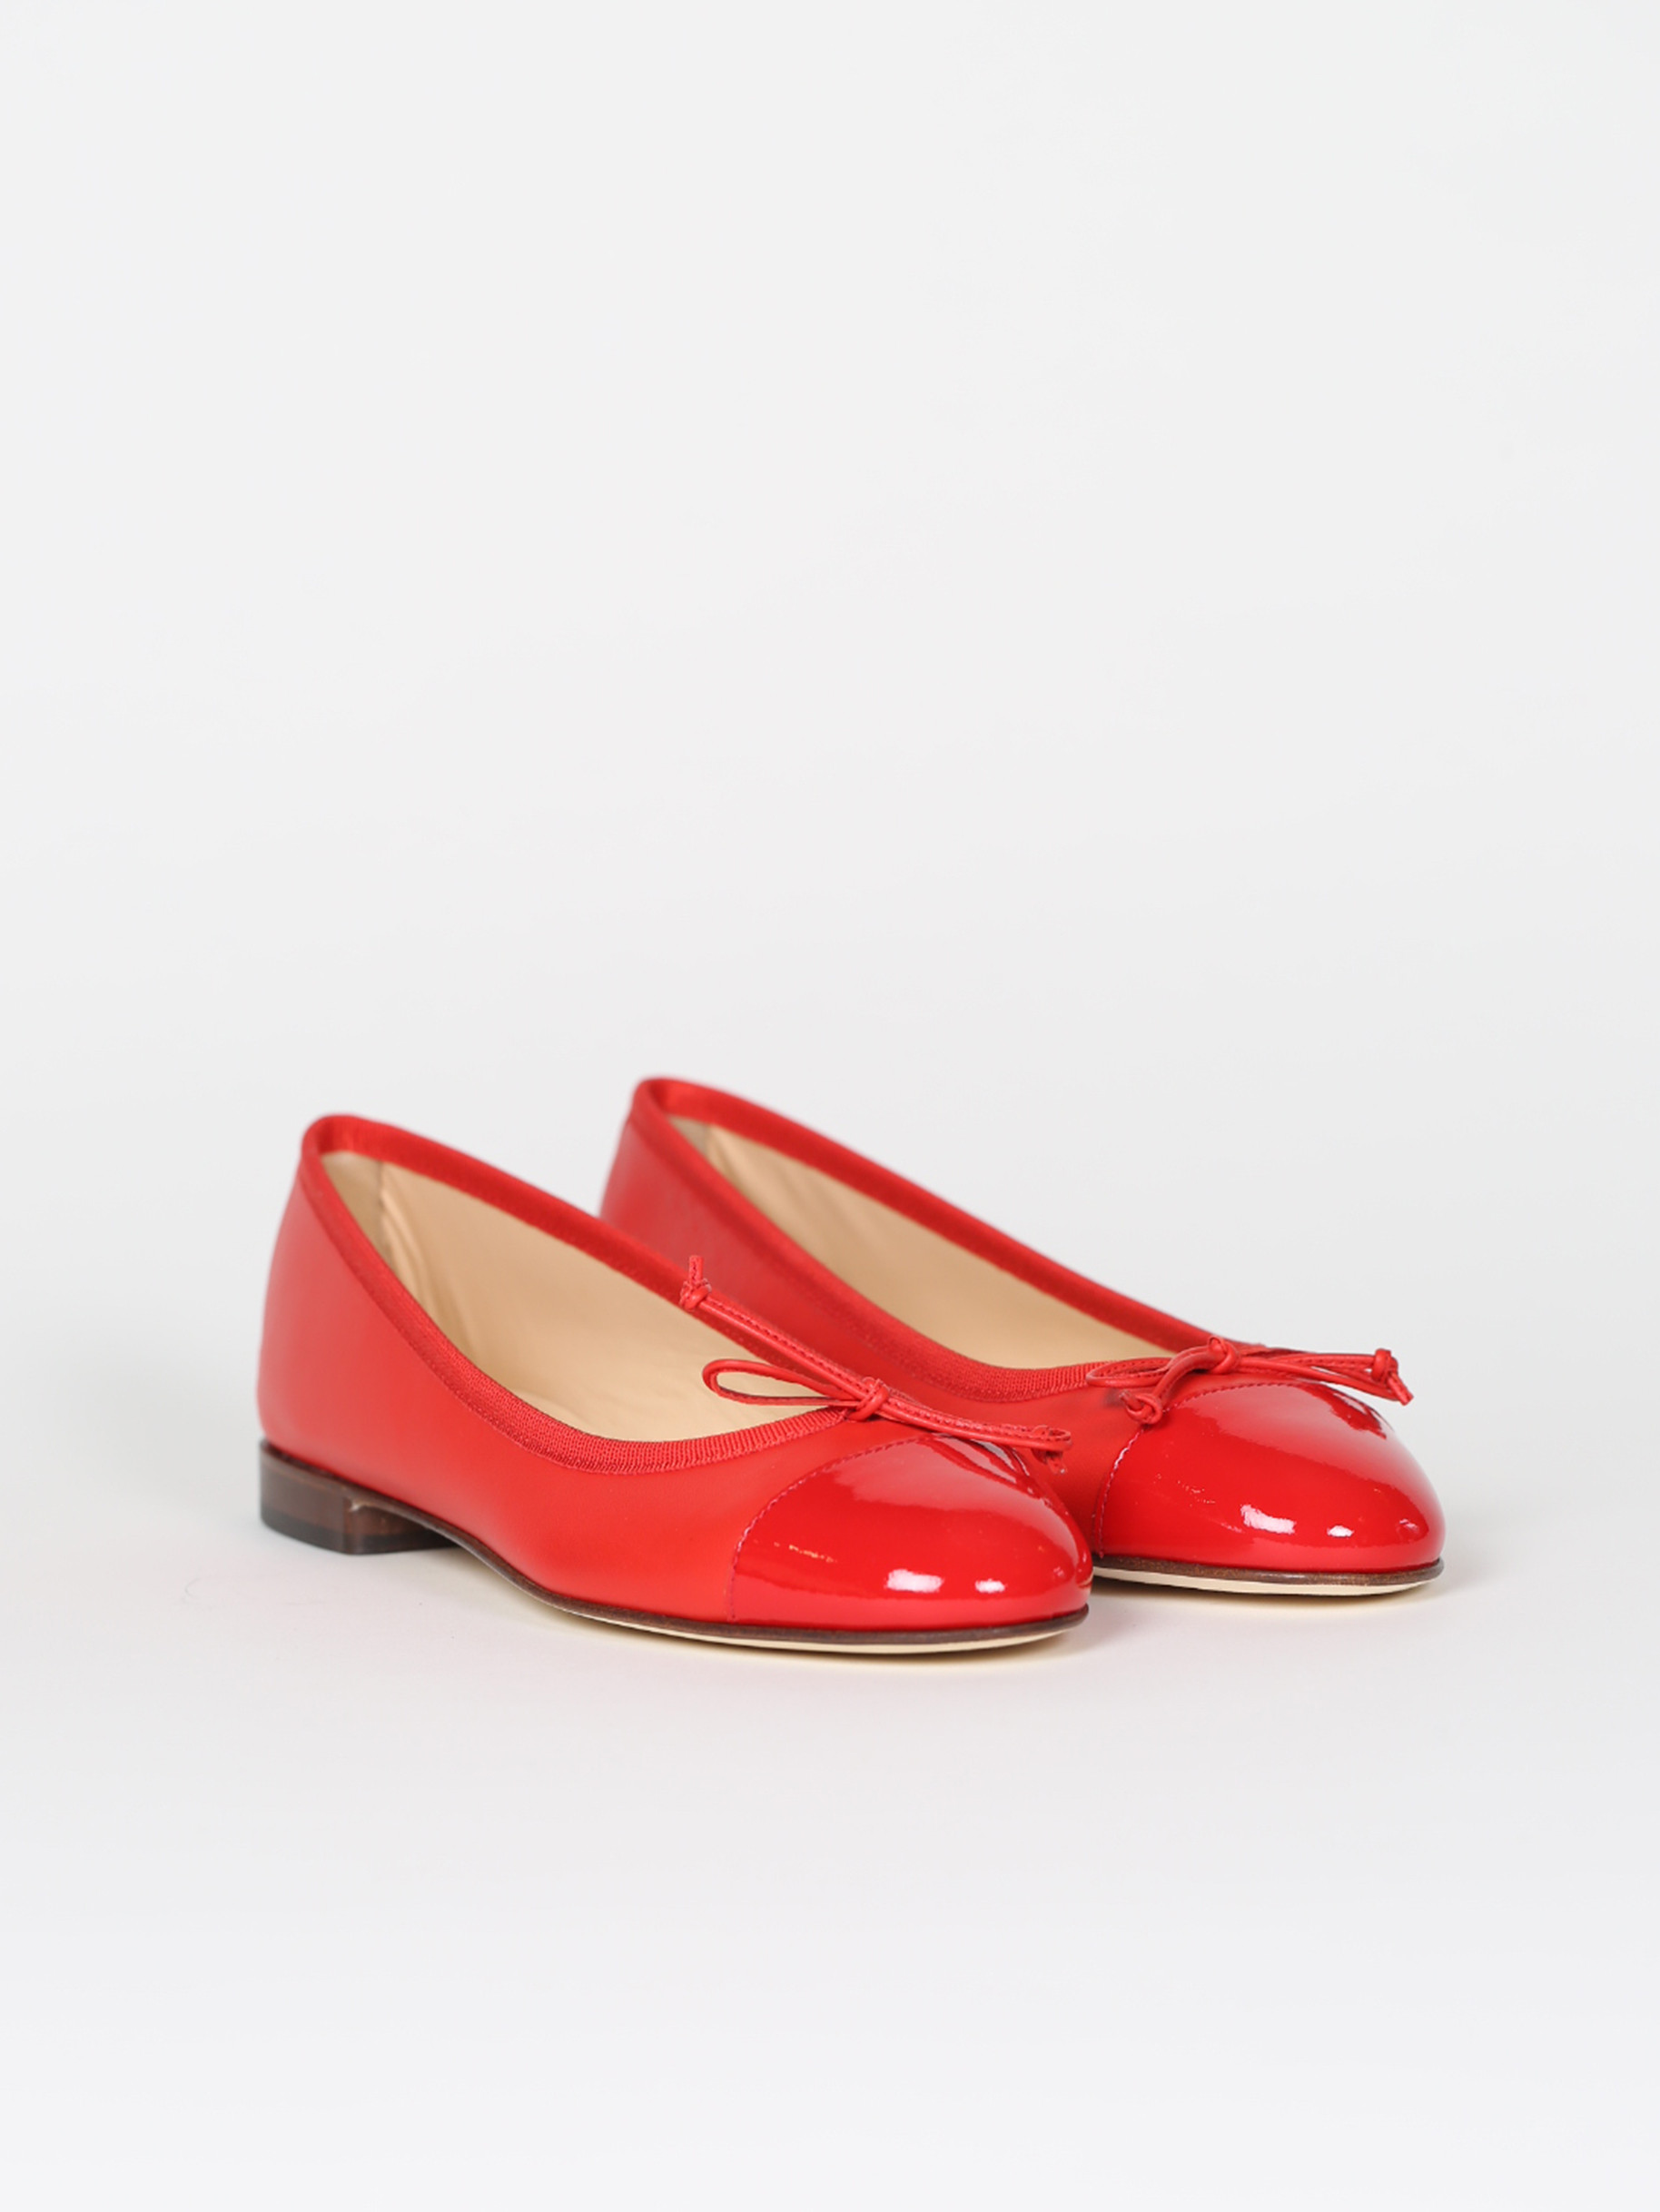 Red leather and patent ballet flats